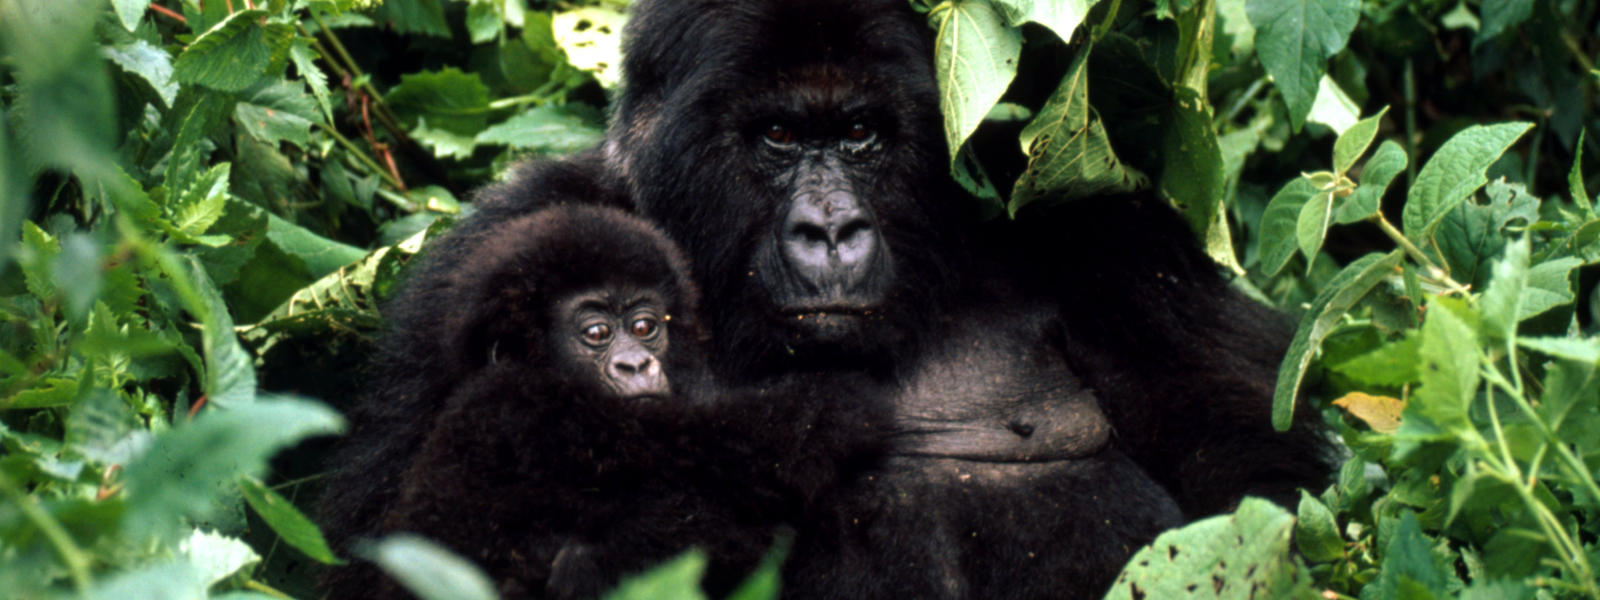 Mountain gorilla numbers are on the rise, despite threats from poaching and habitat destruction